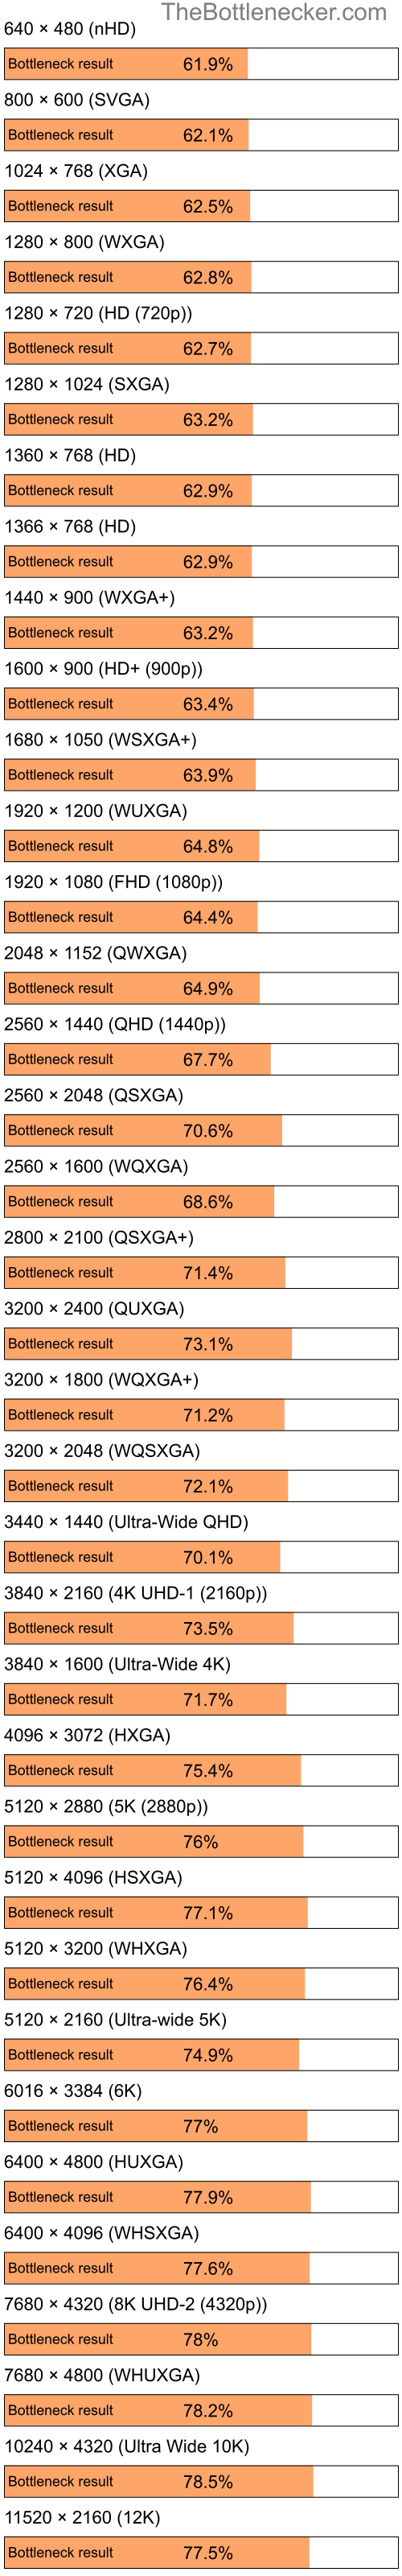 Bottleneck results by resolution for Intel Celeron M 410 and NVIDIA Quadro NVS 130M in General Tasks